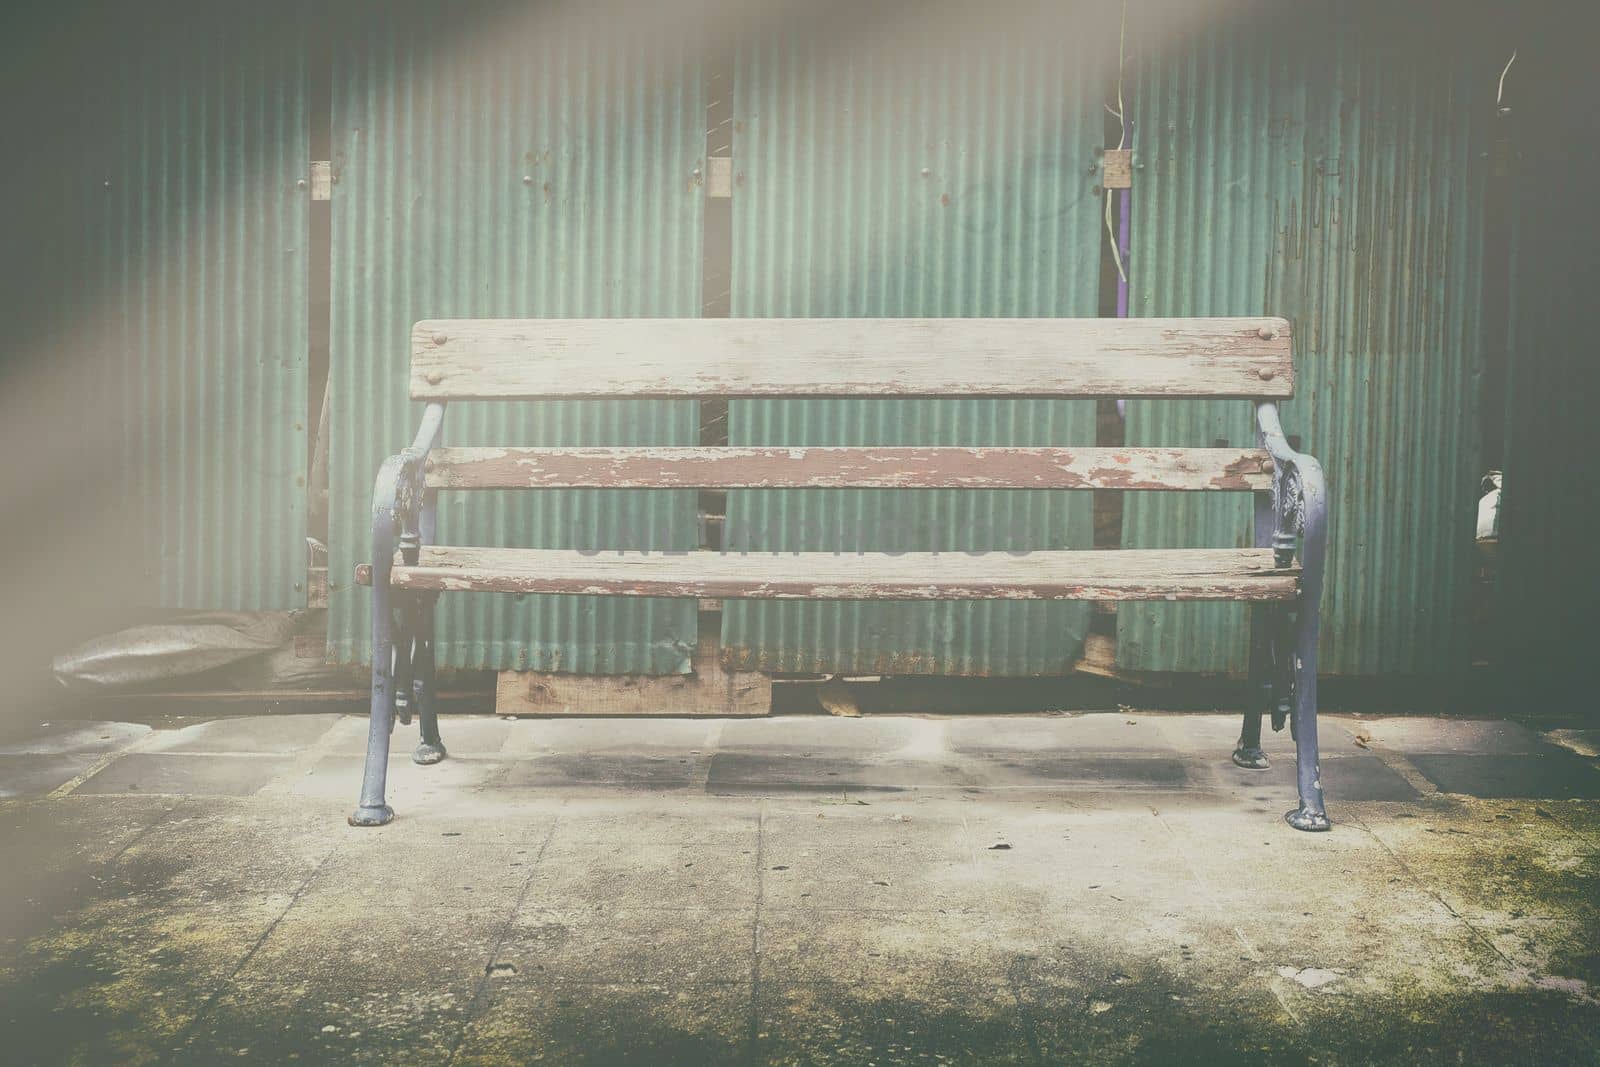 Old Public Bench. (Vintage Style) by mesamong